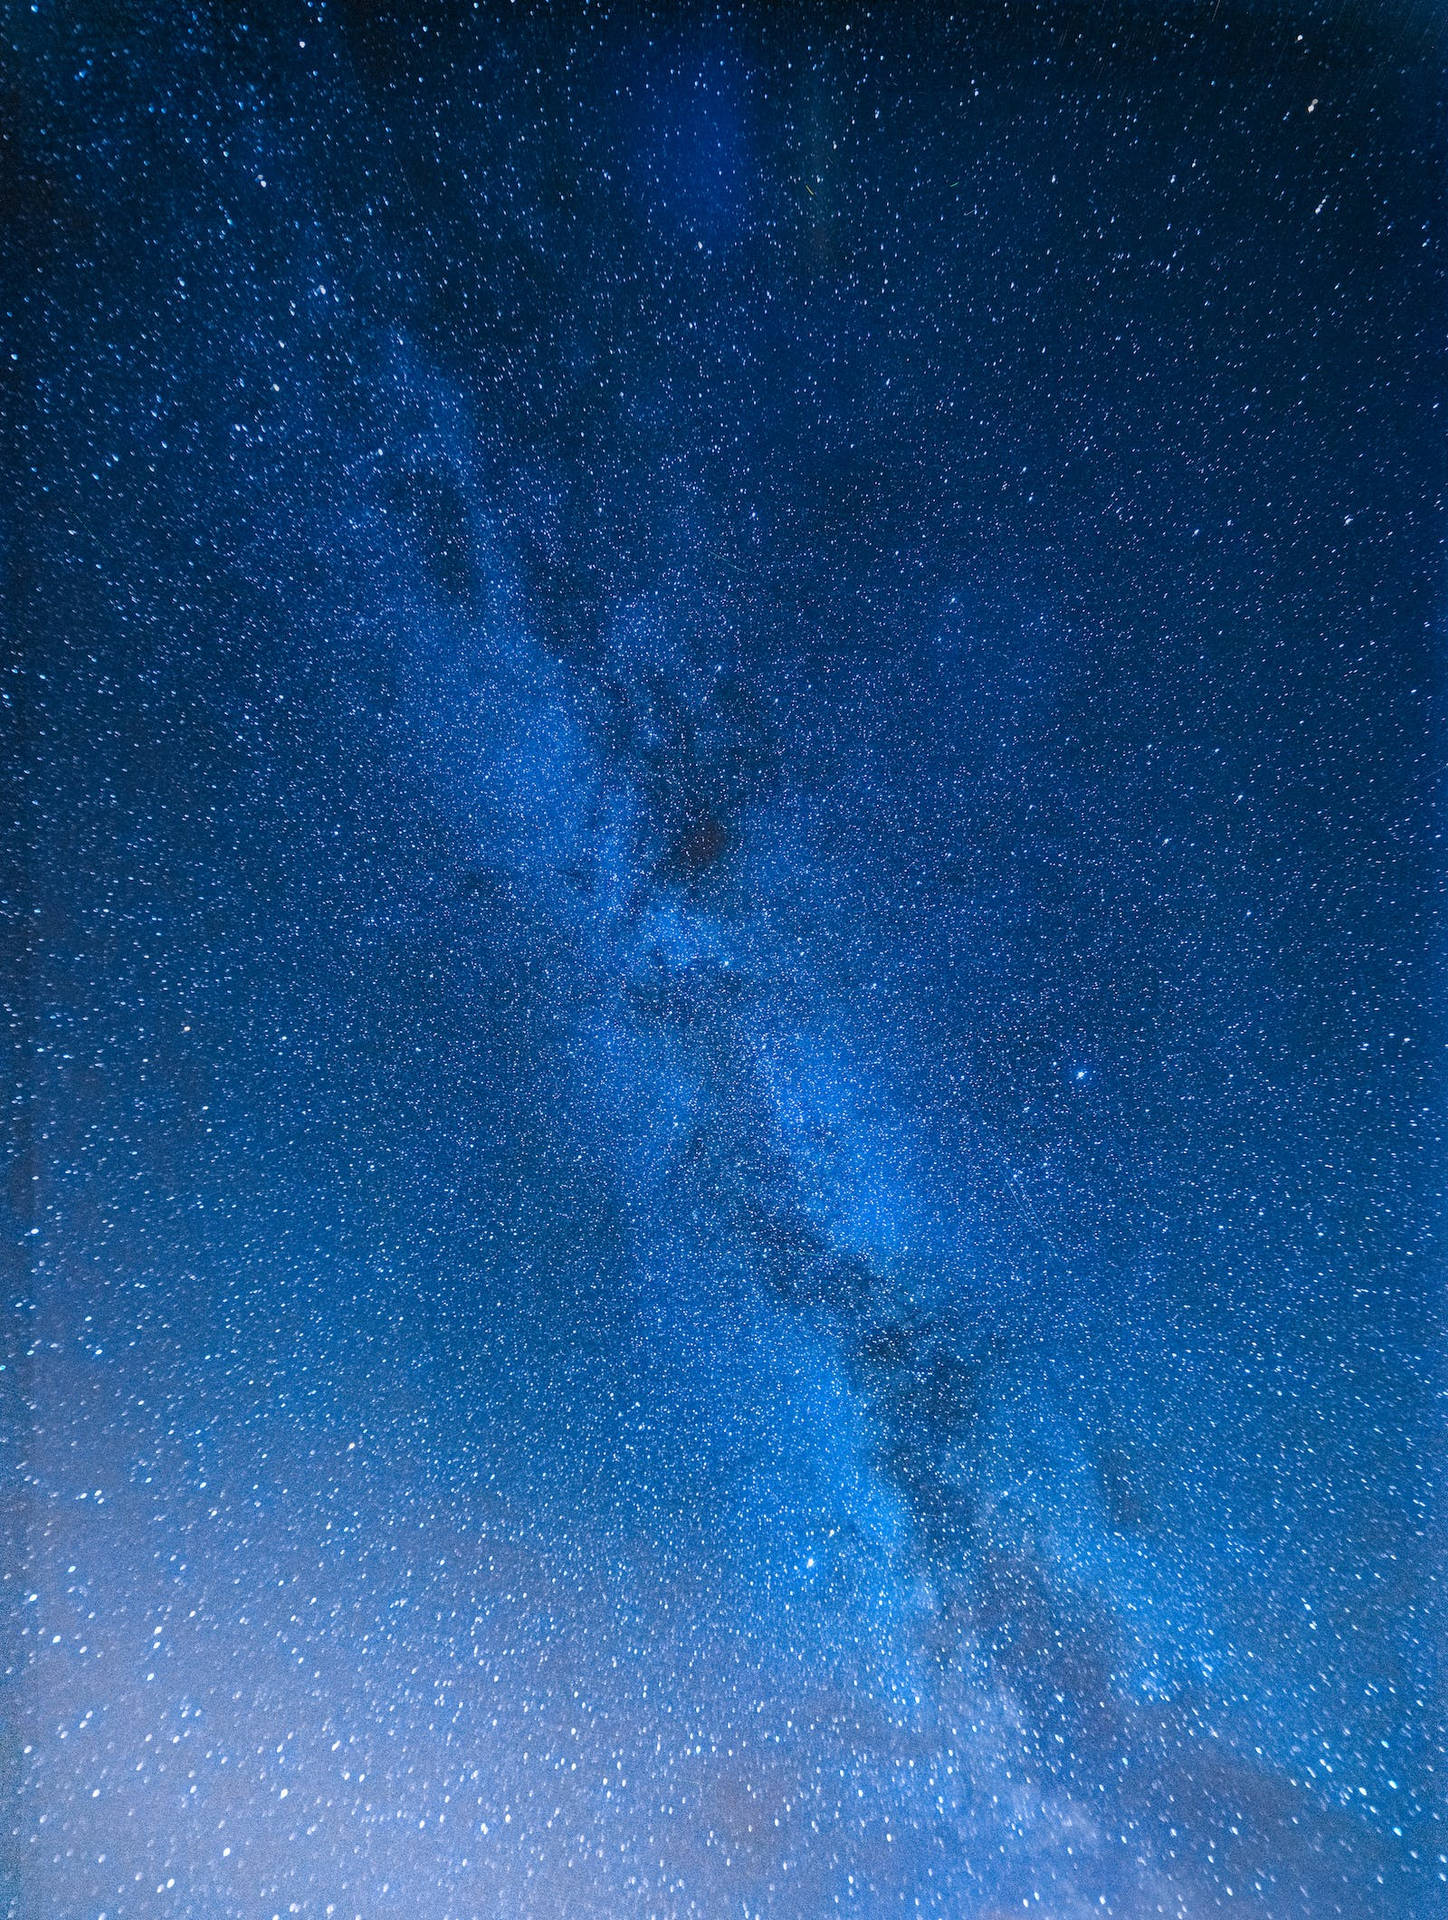 Blue Galaxy Peppered With Stars Wallpaper